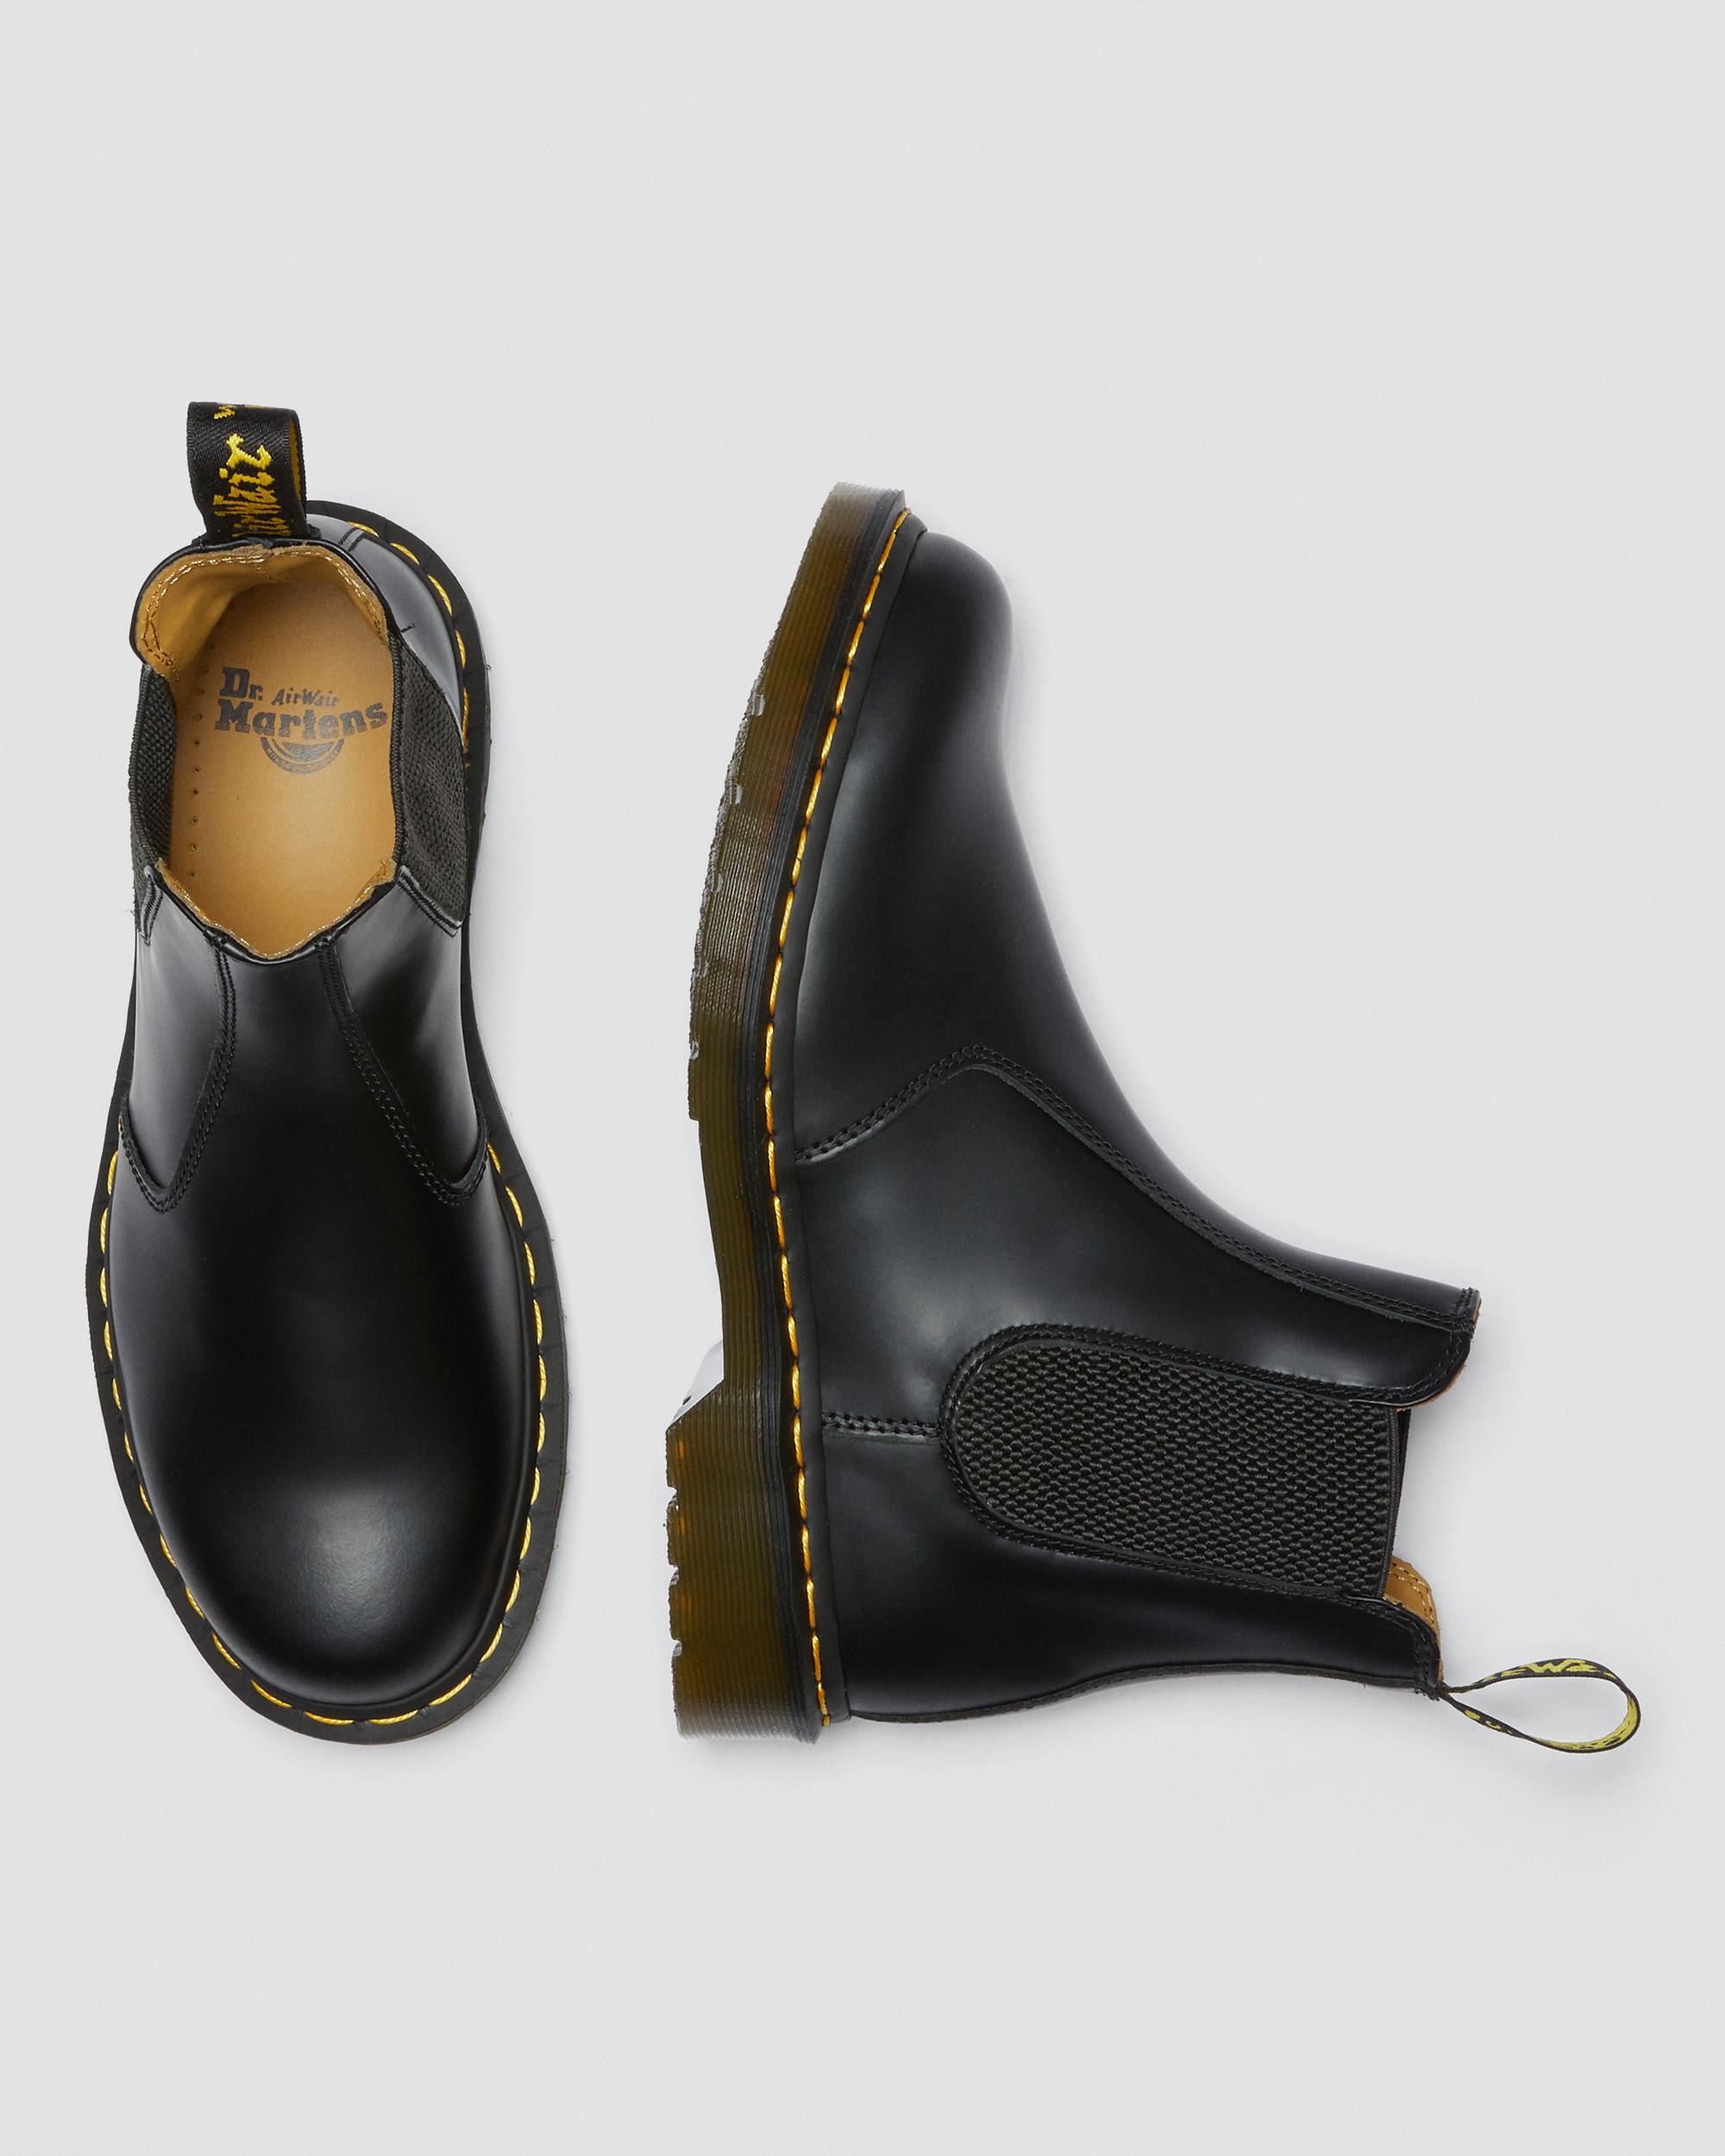 Stivaletti Chelsea 2976 in pelle Smooth e cuciture gialleStivaletti Chelsea di pelle  2976 con cuciture gialle Smooth Dr. Martens